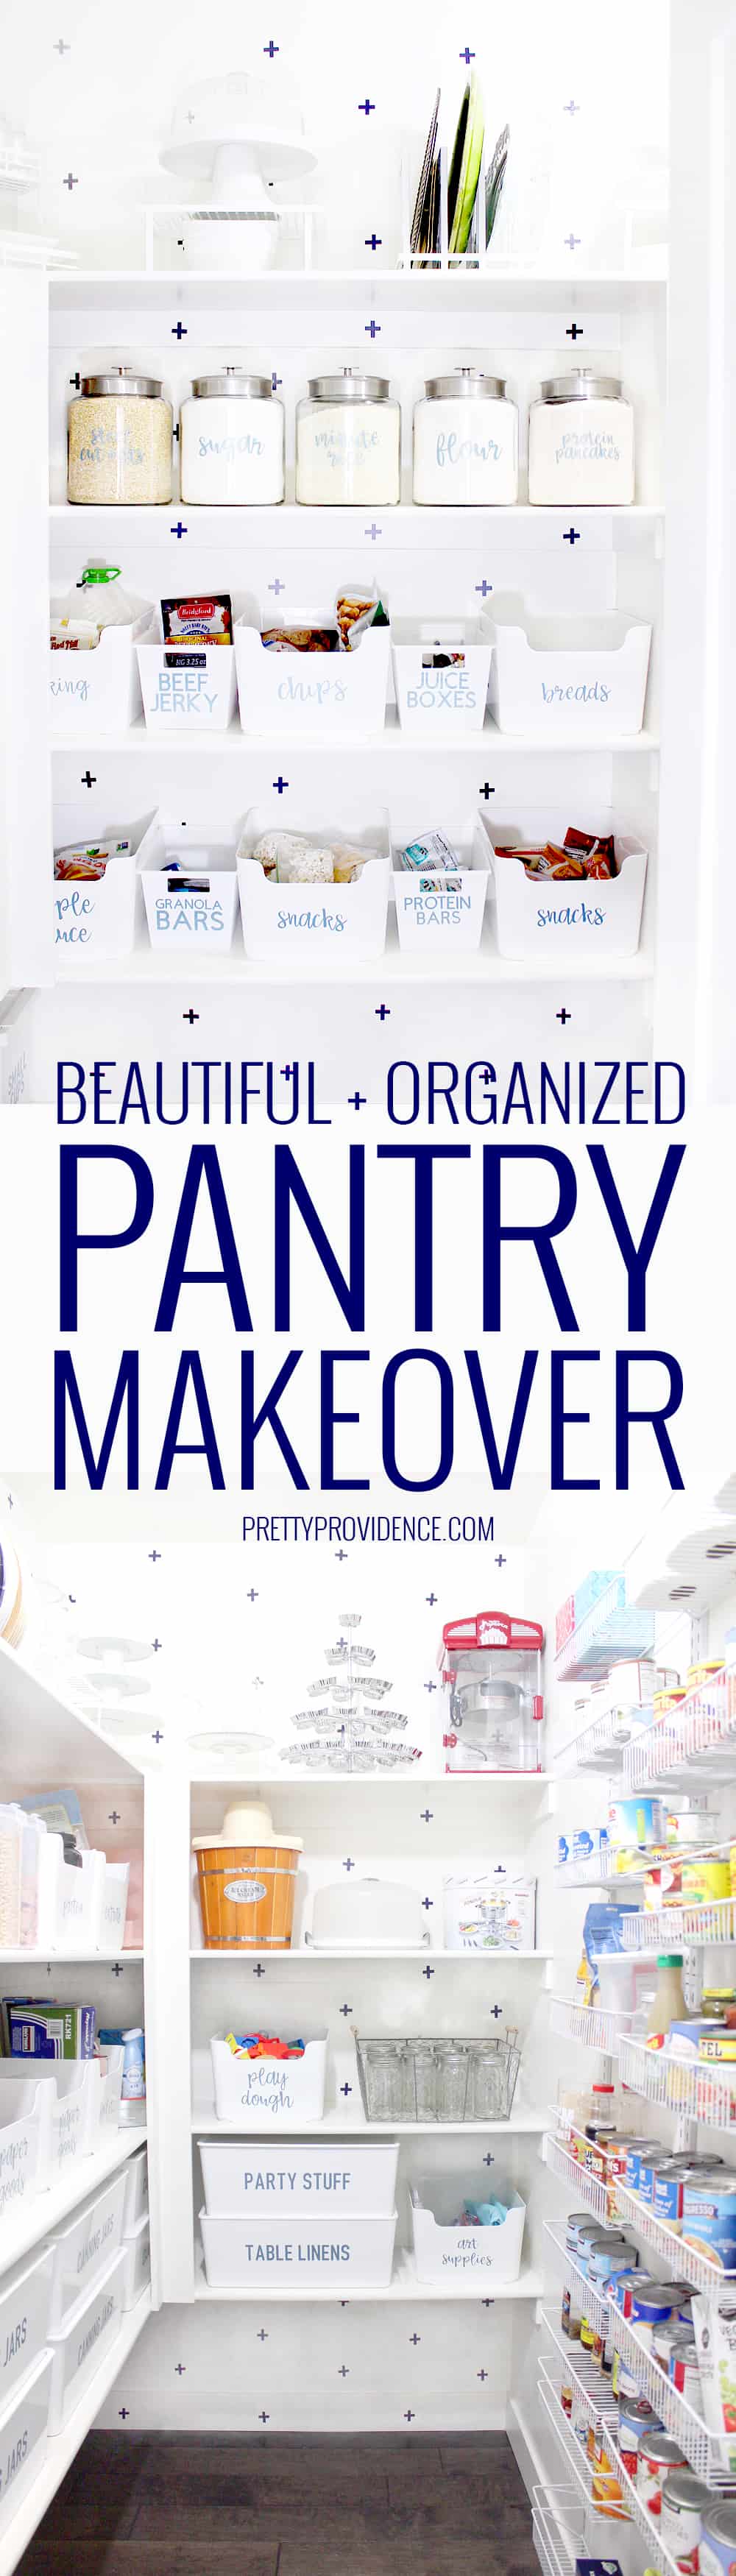 Pantry Organization and Makeover